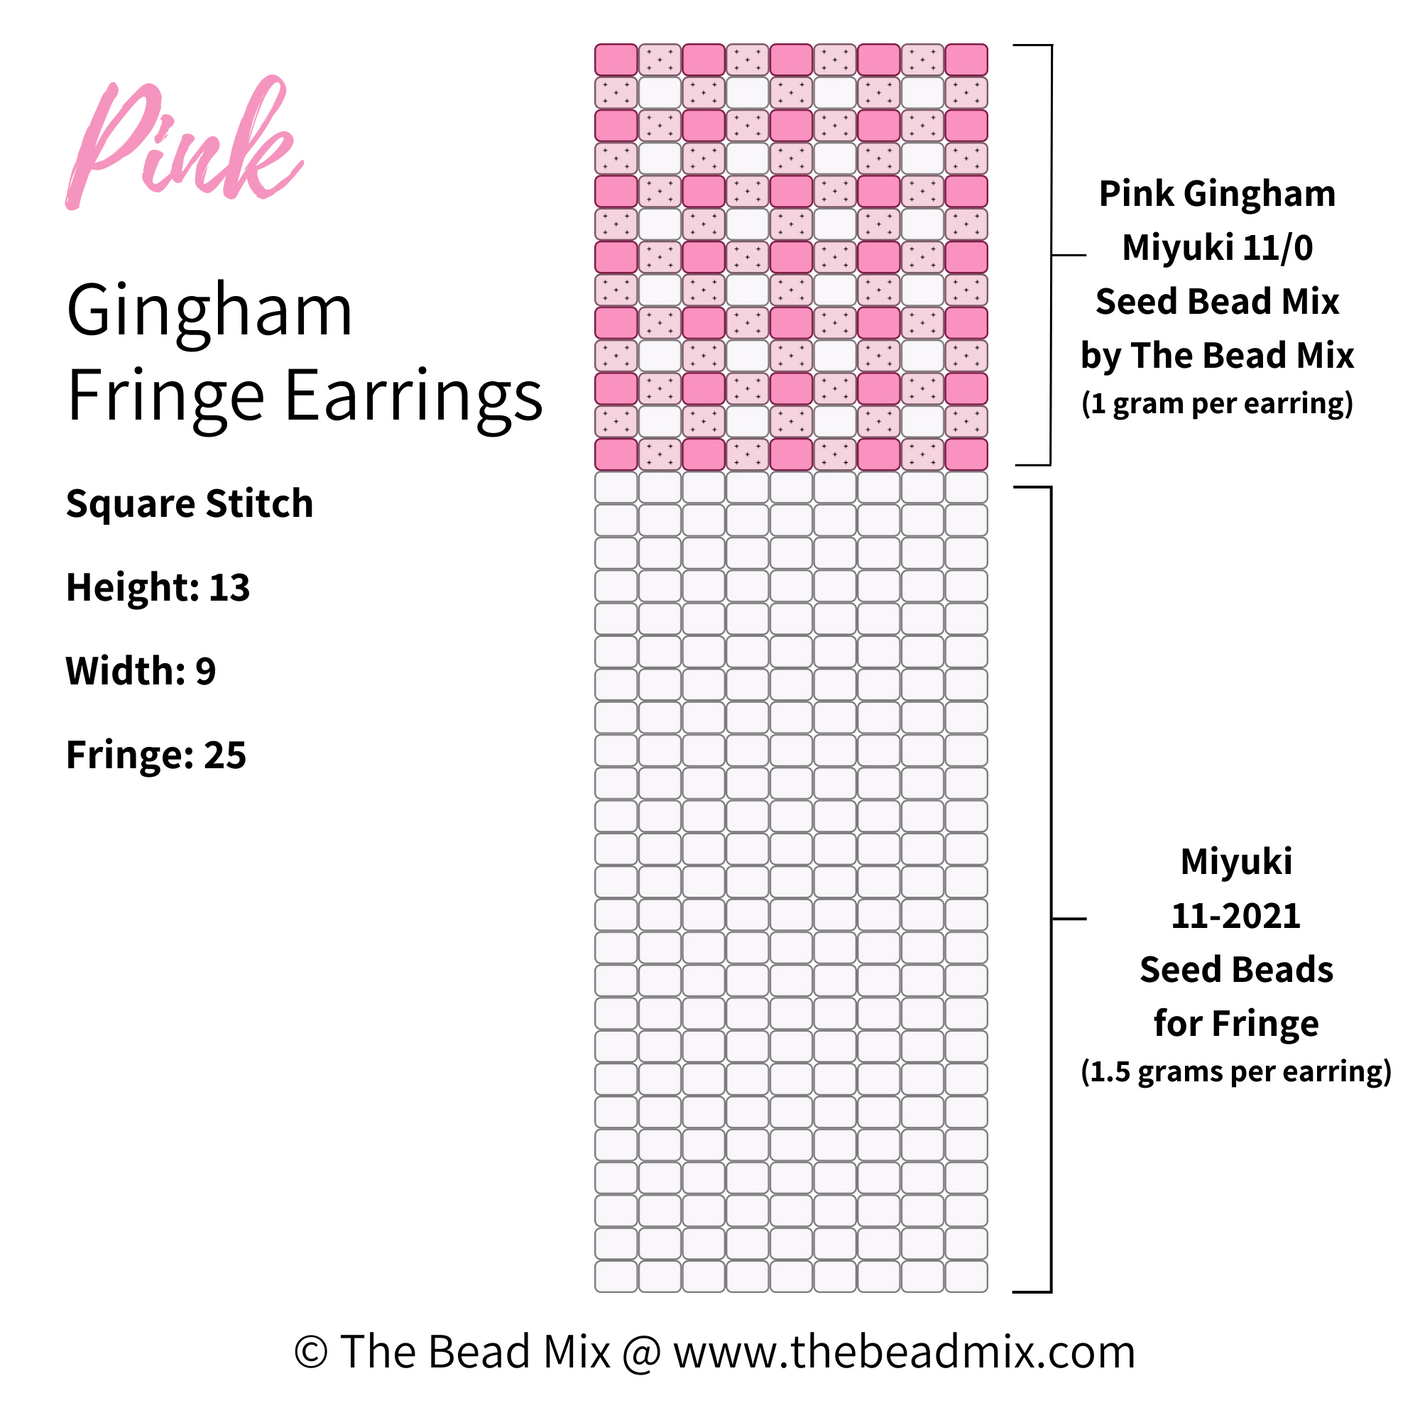 Free square stitch beading pattern to make pink gingham pattern fringe earrings by The Bead Mix